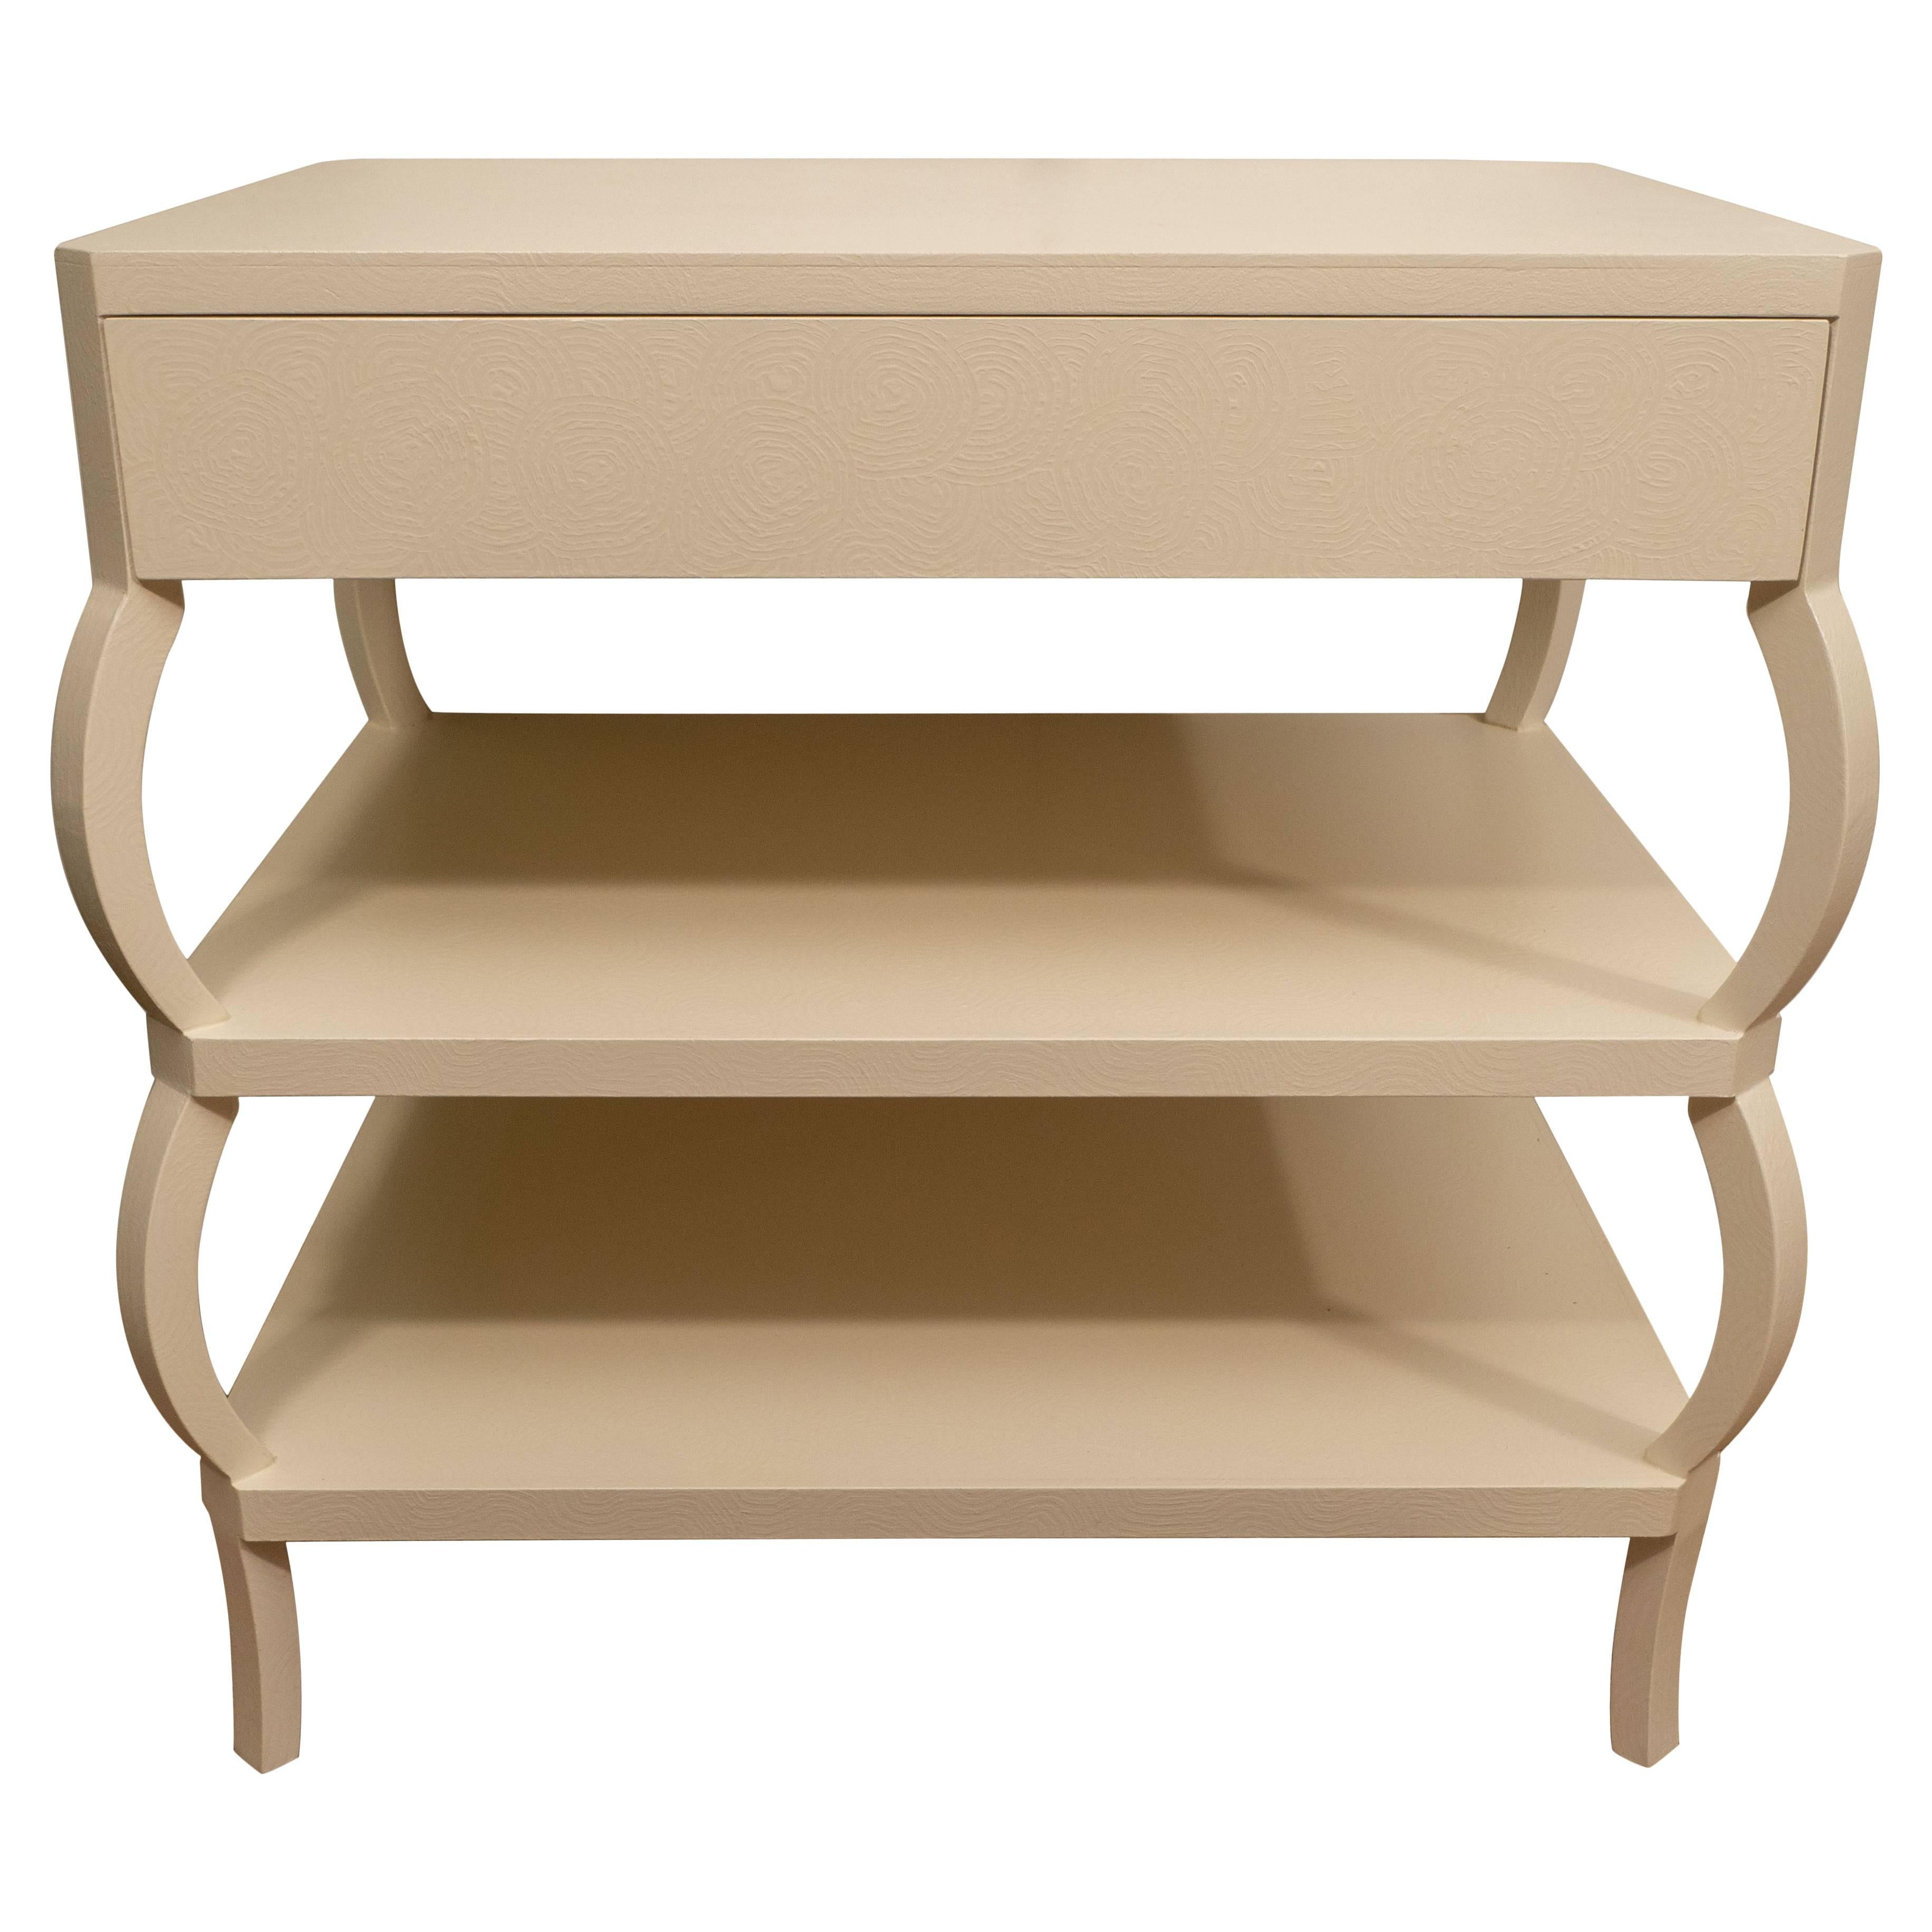 Perfect for night tables or for flanking a sofa, these tables feature a top drawer and two lower shelves. They have been painted by hand in a cream color with a subtle “swirl” design.